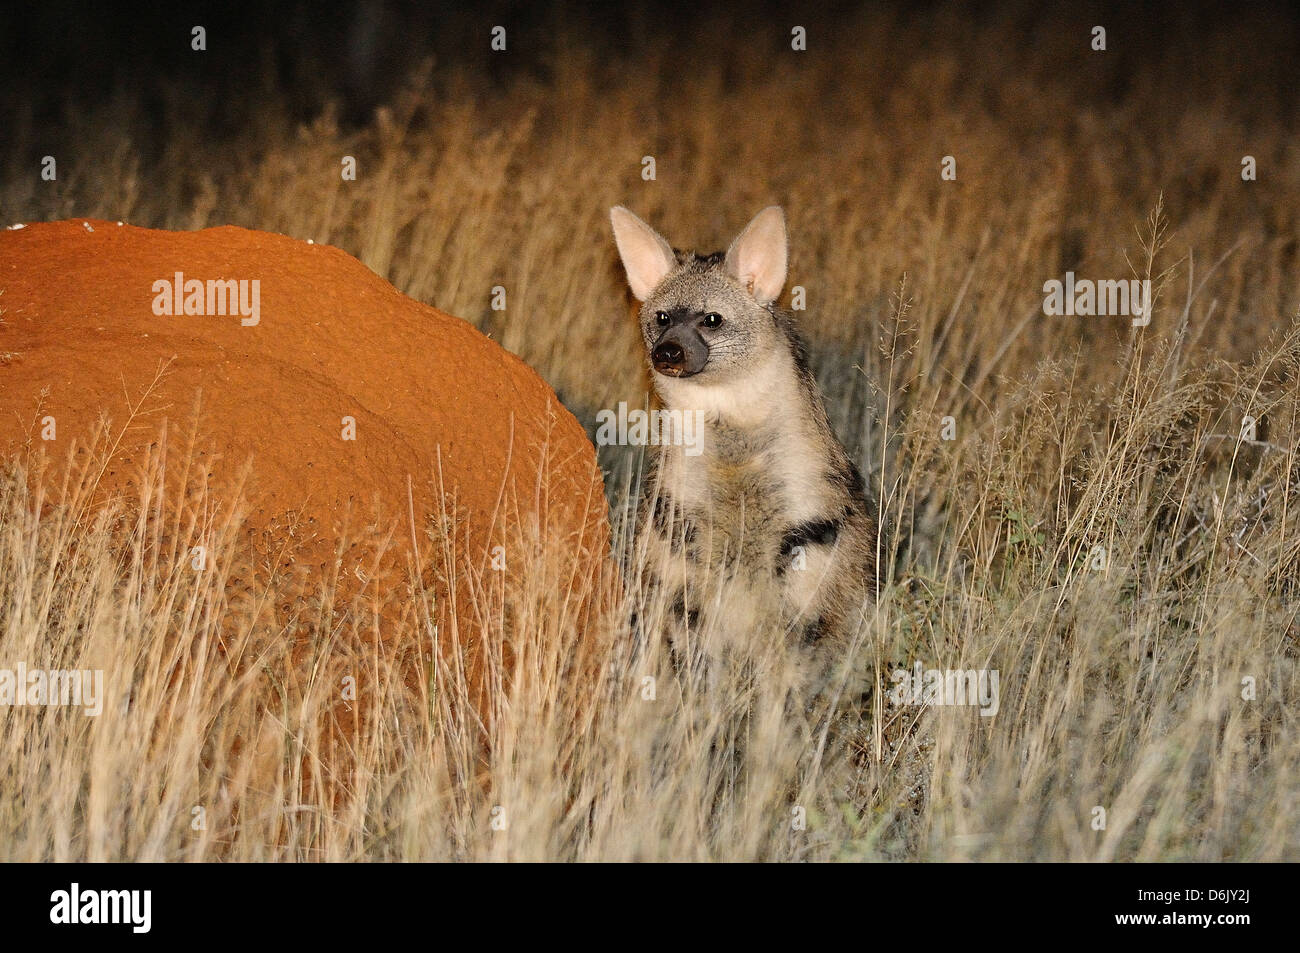 Aardwolf Proteles cristata Photographed in the wild against termite mound in Northern Cape, South Africa Stock Photo